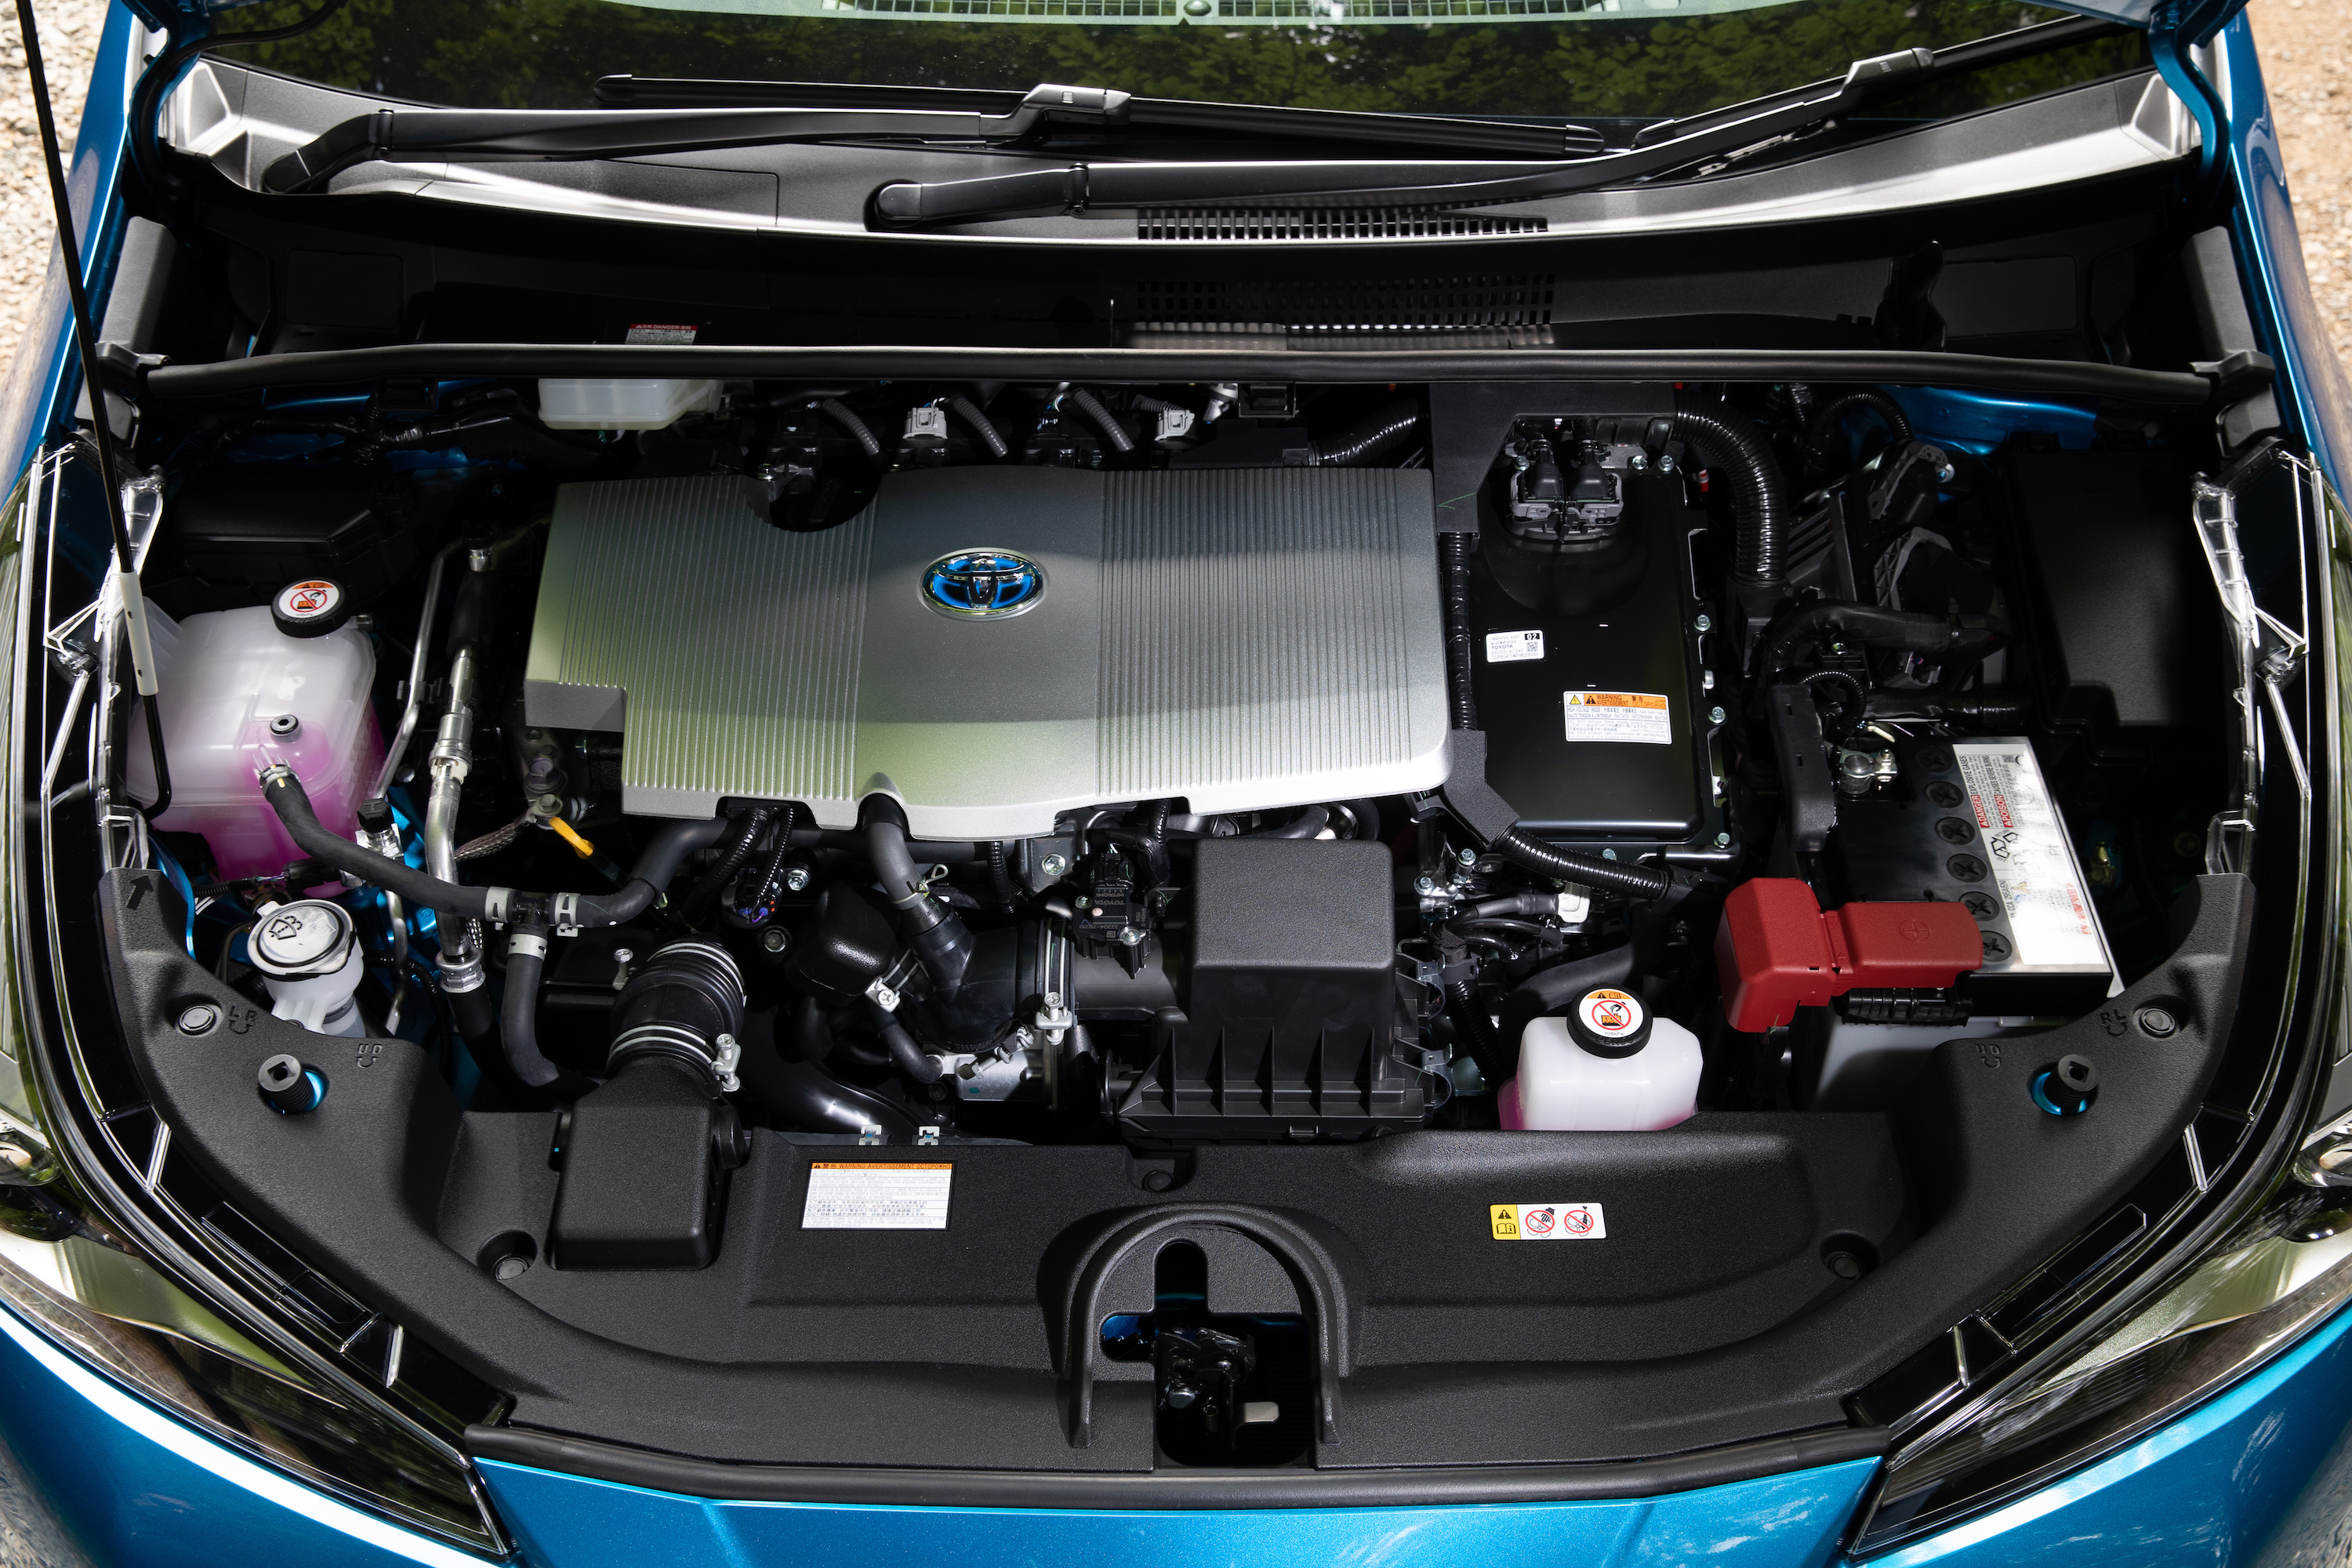 A 1.8-litre petrol engine is linked to electric motors